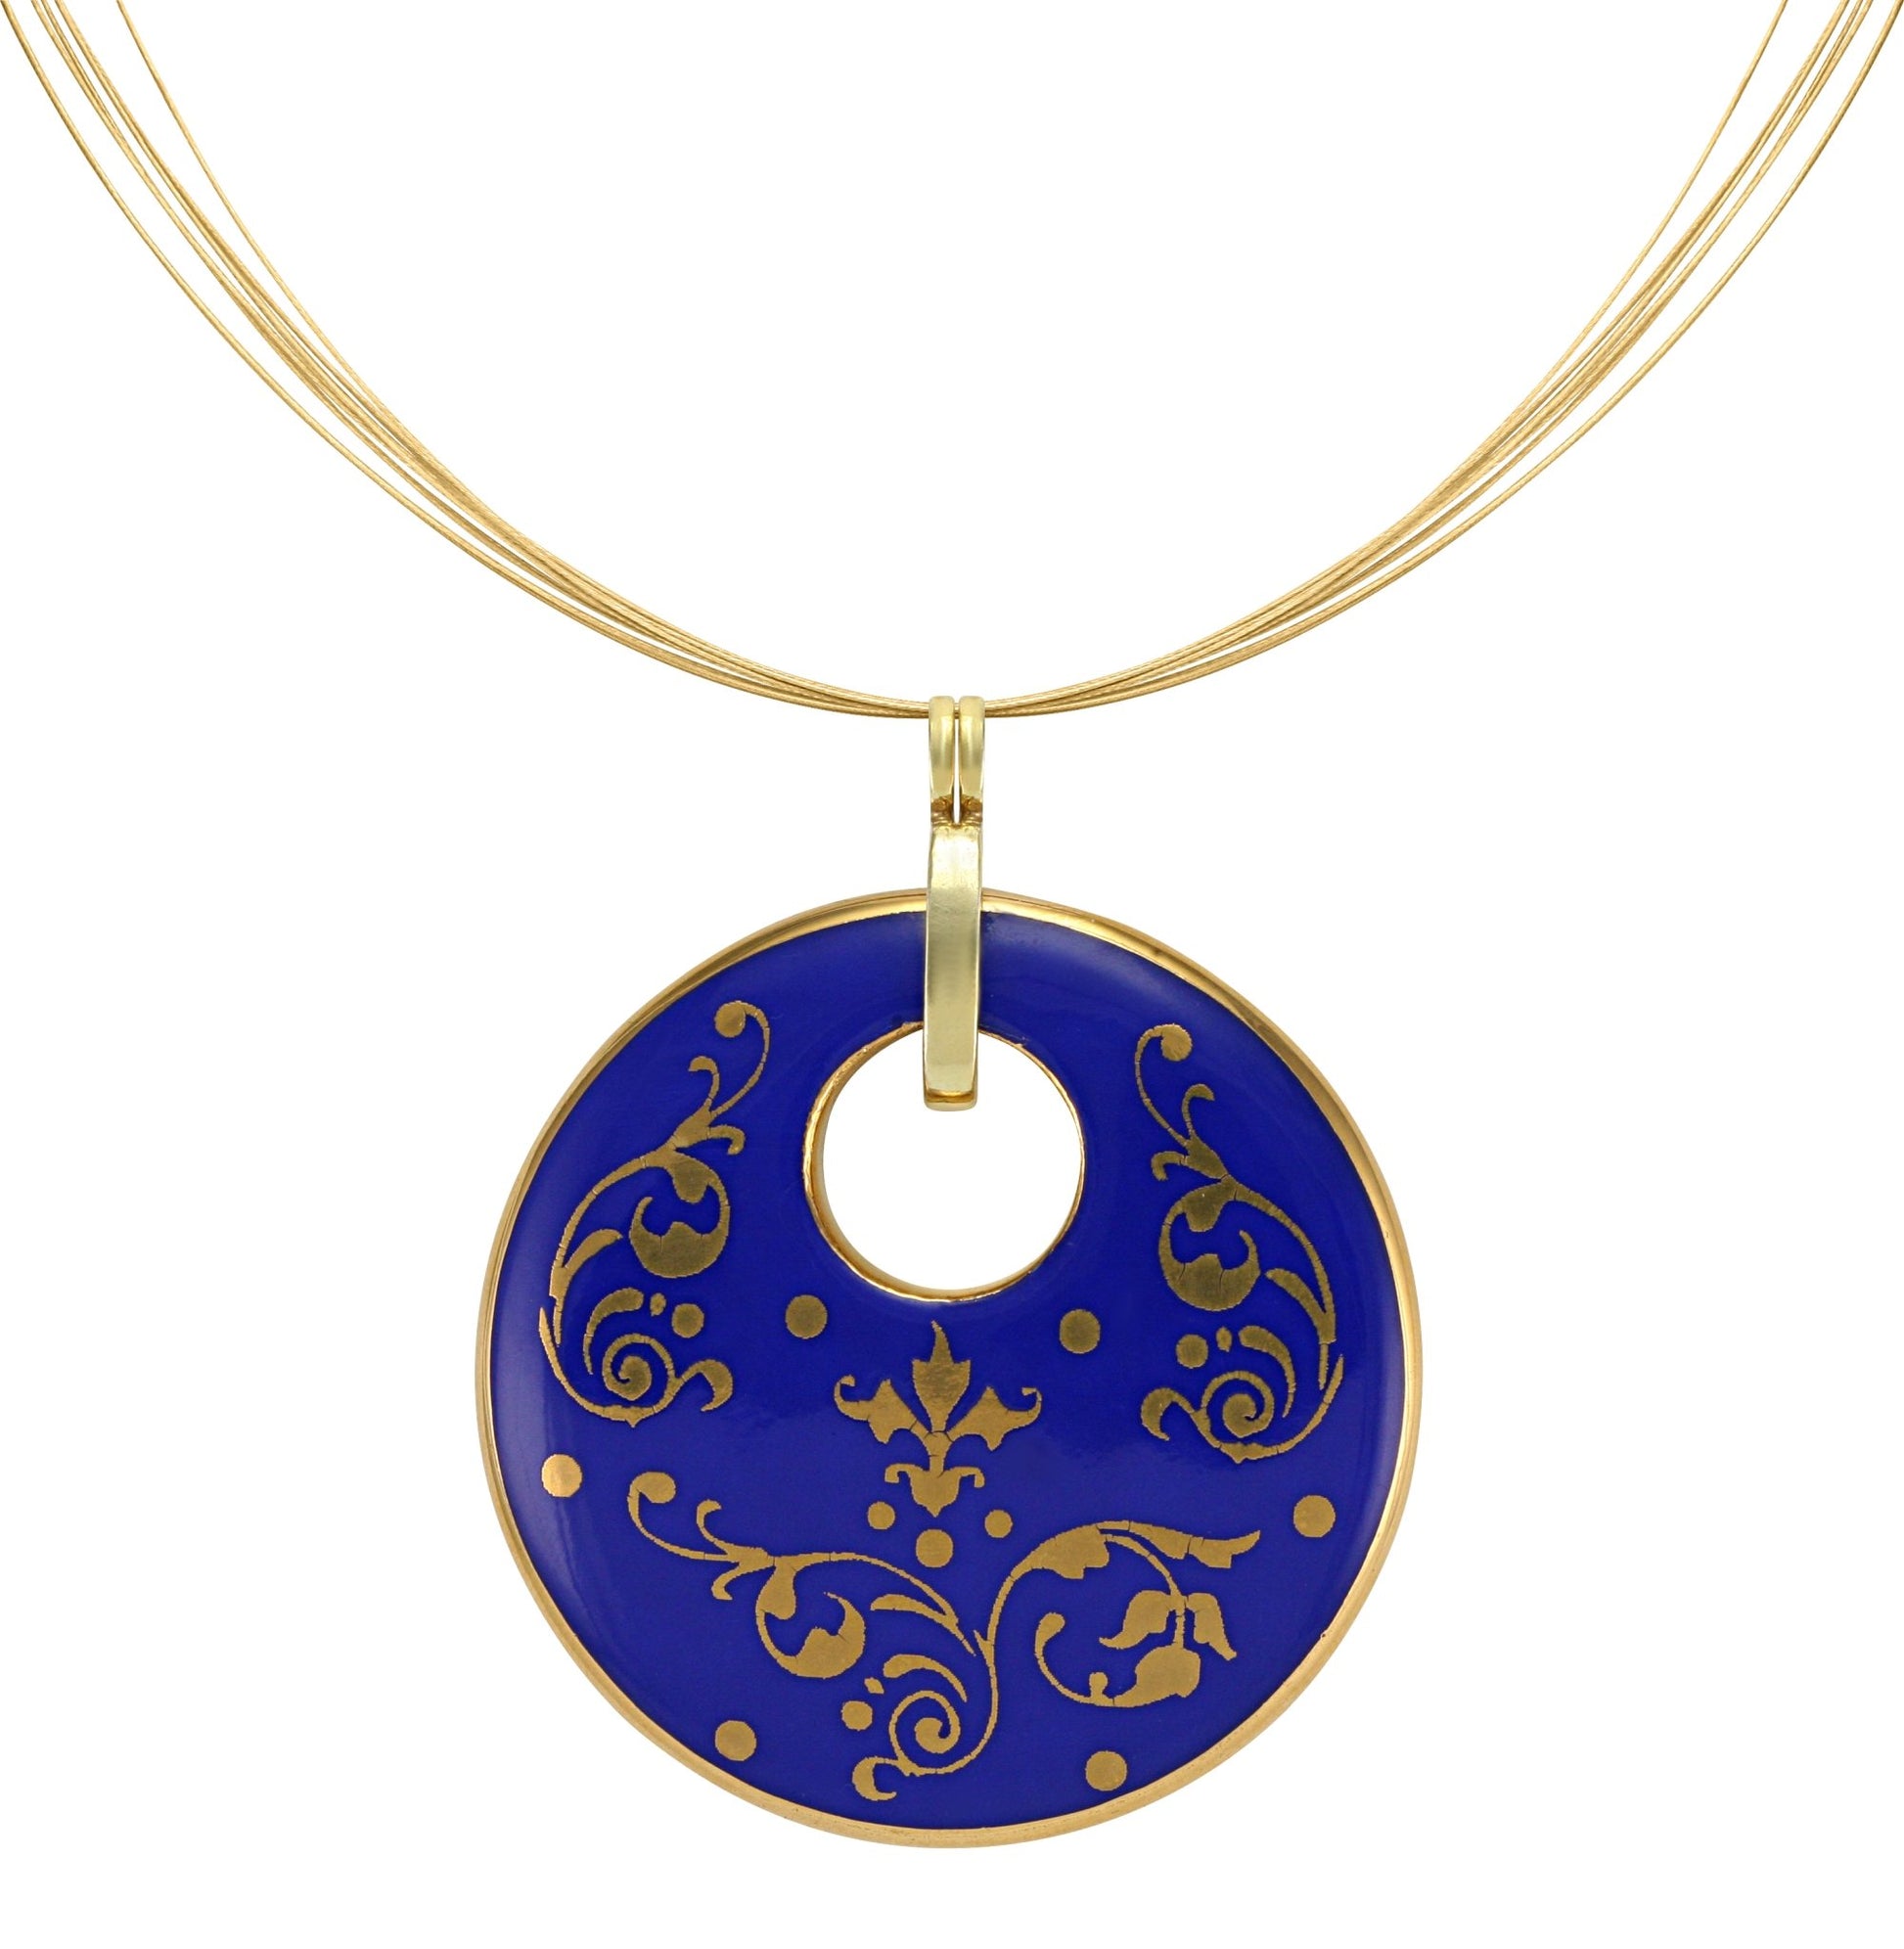 baroque royal blue 21 k gold plated round hand painted fine porcelain pendant 52 mm